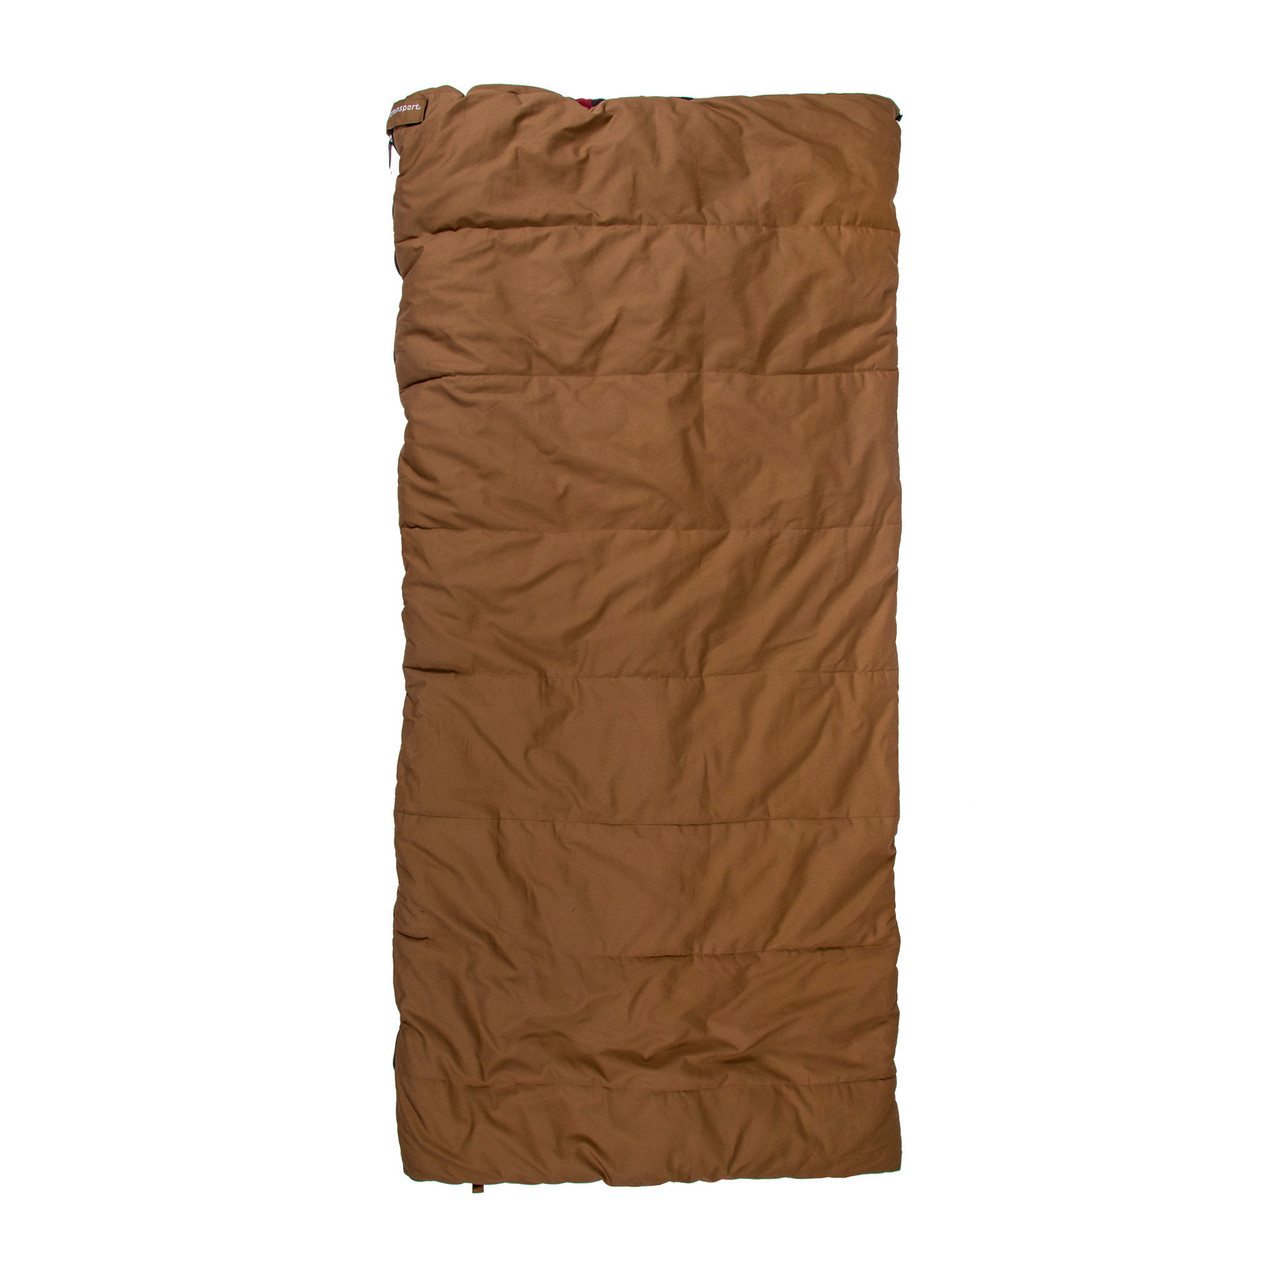 Stansport 6lb Grizzly Sleeping Bag